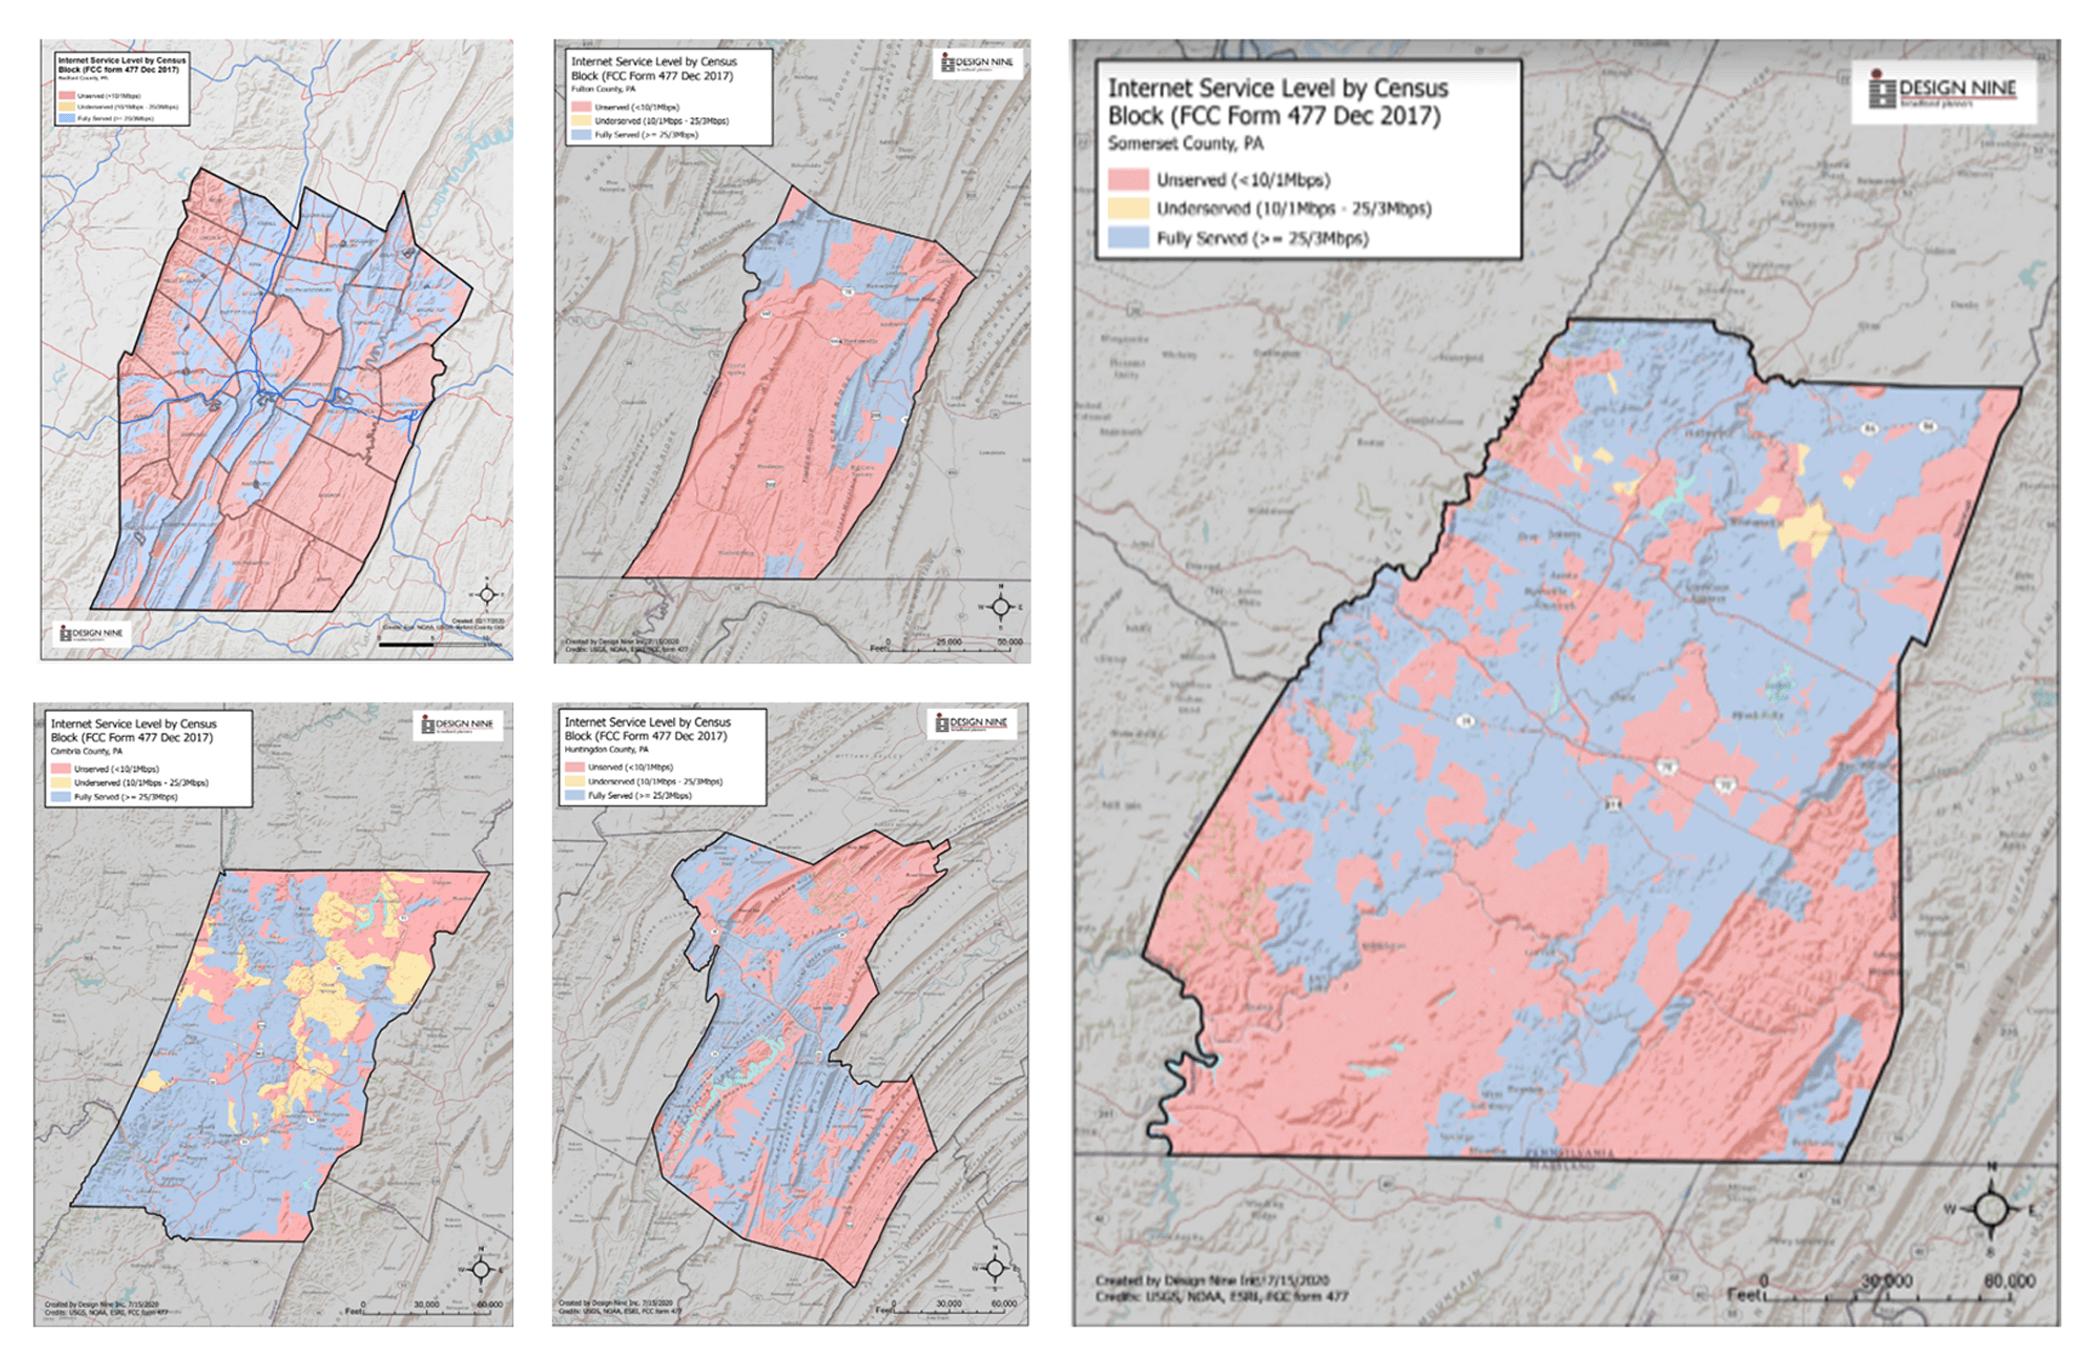 A report prepared for the Southern Alleghenies Planning & Development Commission shows the areas of each county deemed “unserved” based on federal data from 2017. In the maps shown, pink areas are “unserved,” yellow areas are “underserved,” and blue areas are “fully served.”